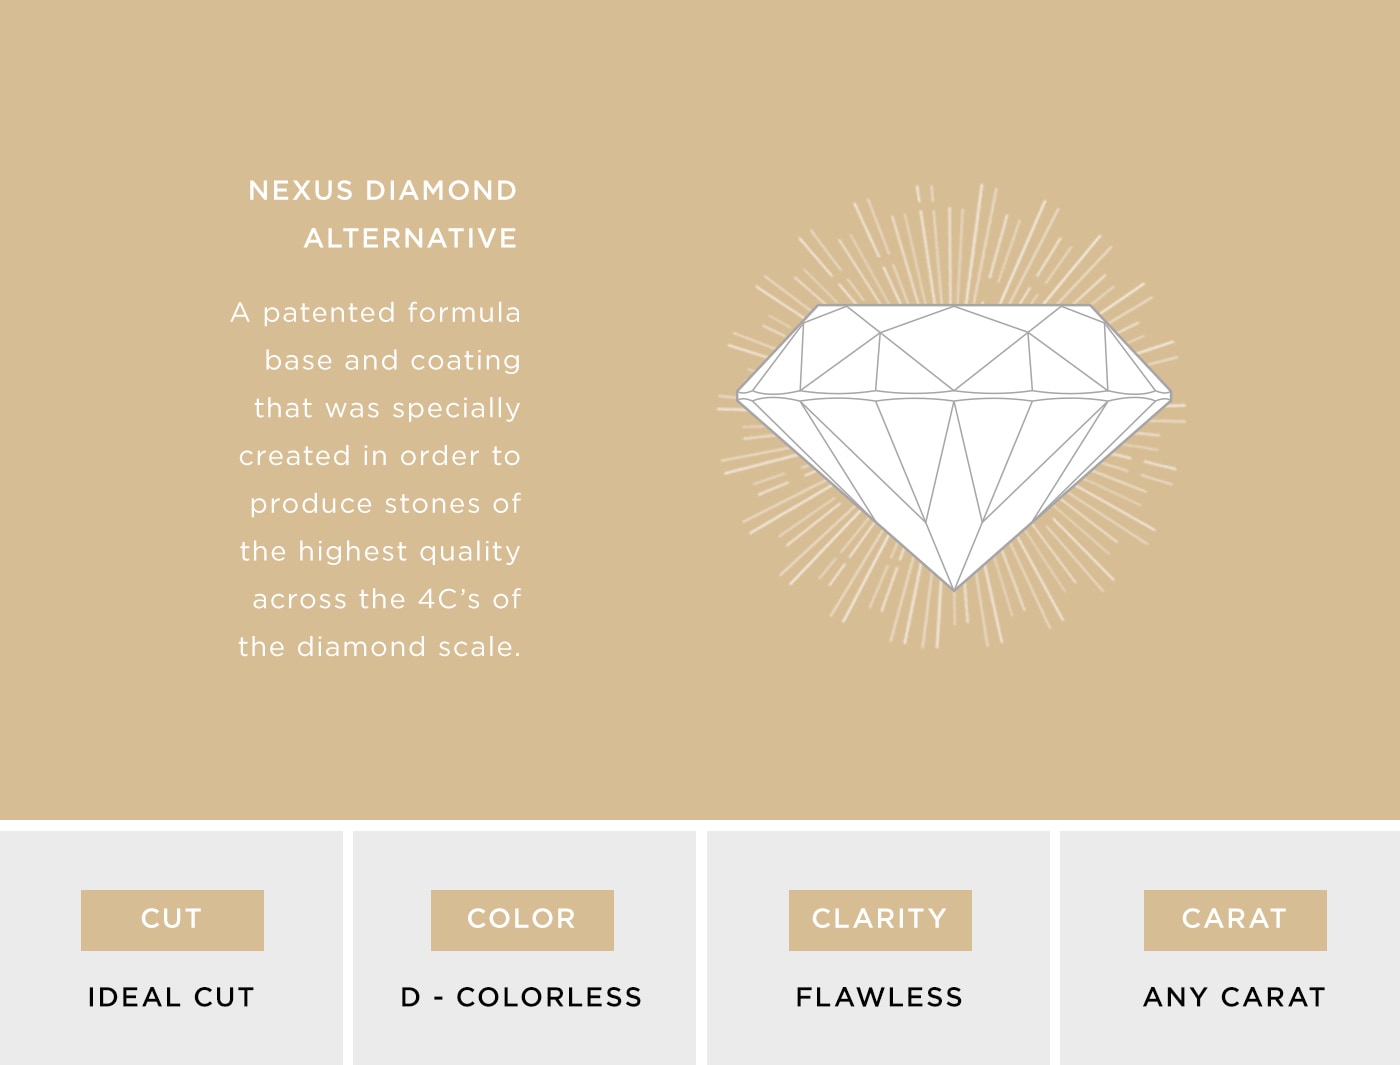 A depiction of the 4Cs of Diamond Quality, where Nexus Diamonds rate the highest.